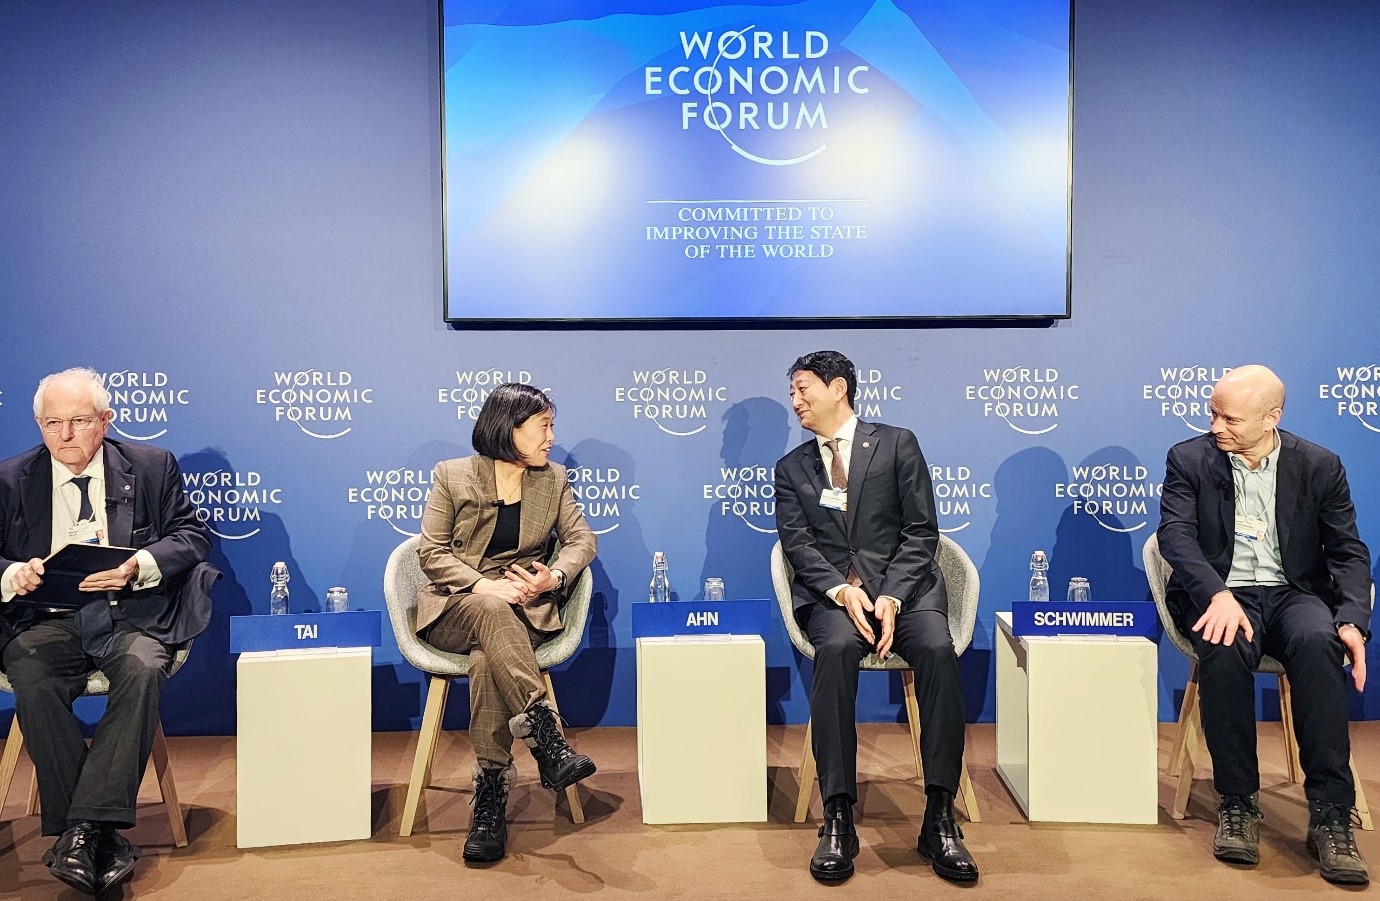 Trade Minister attends trade ministerial sessions at Davos Image 0